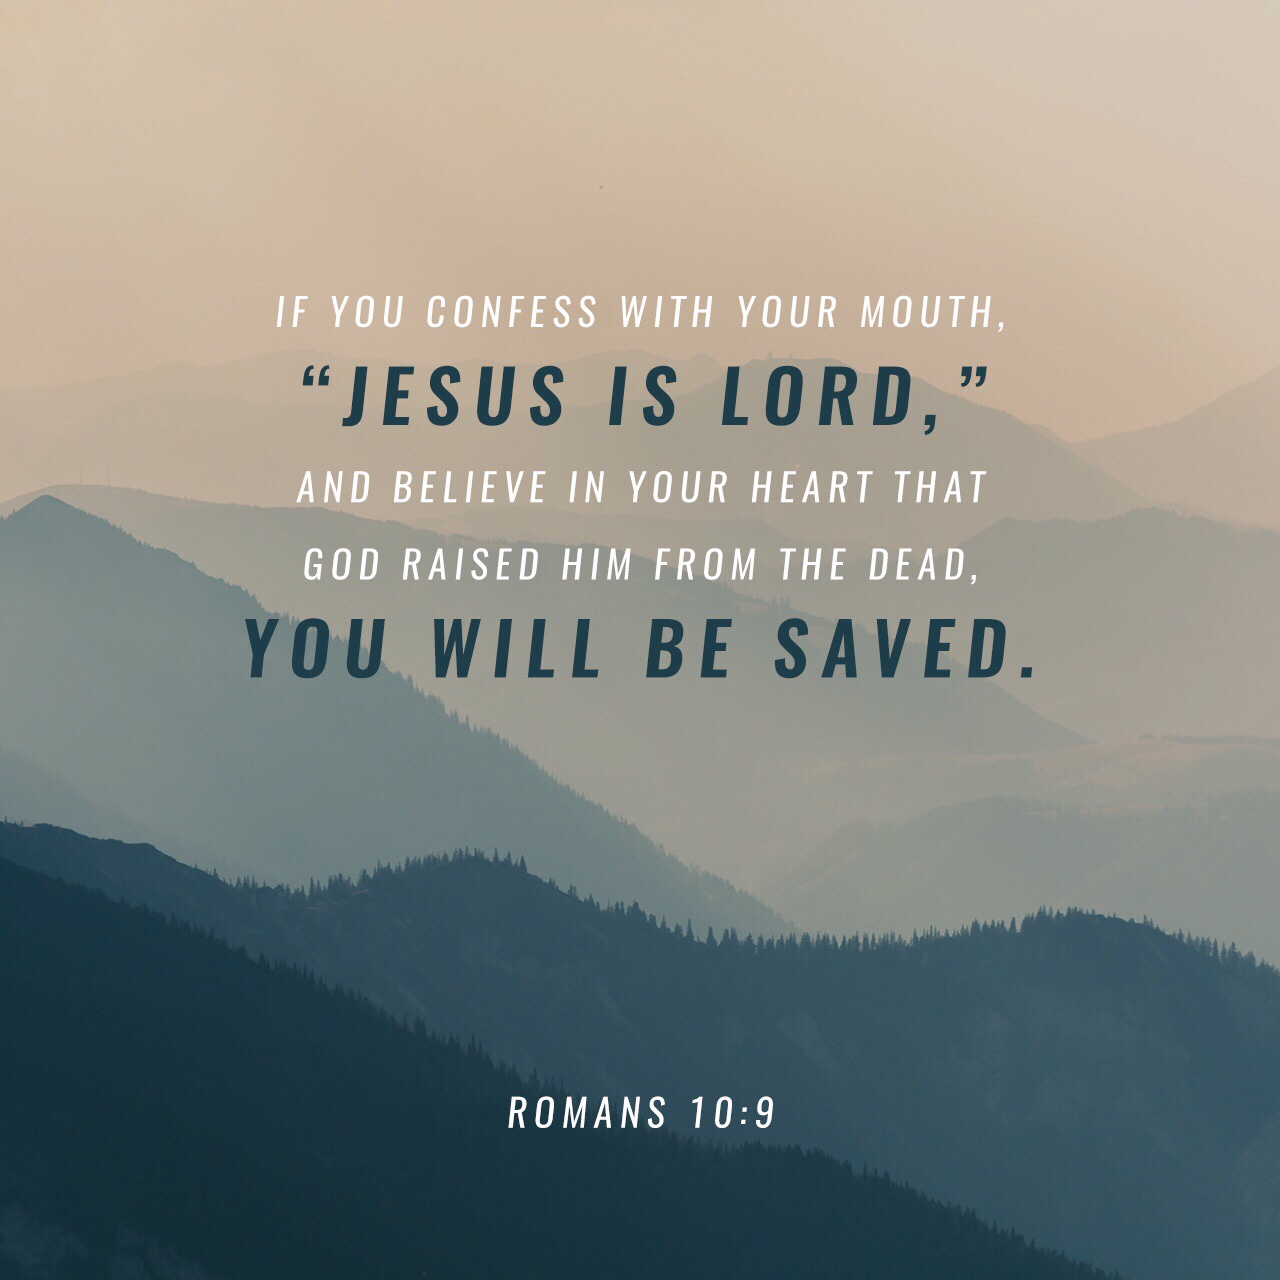 VOTD June 19, 2019 “that if you confess with your mouth Jesus as Lord, and believe in your heart that God raised Him from the dead, you will be saved;” ‭‭ROMANS‬ ‭10:9‬ ‭NASB‬‬